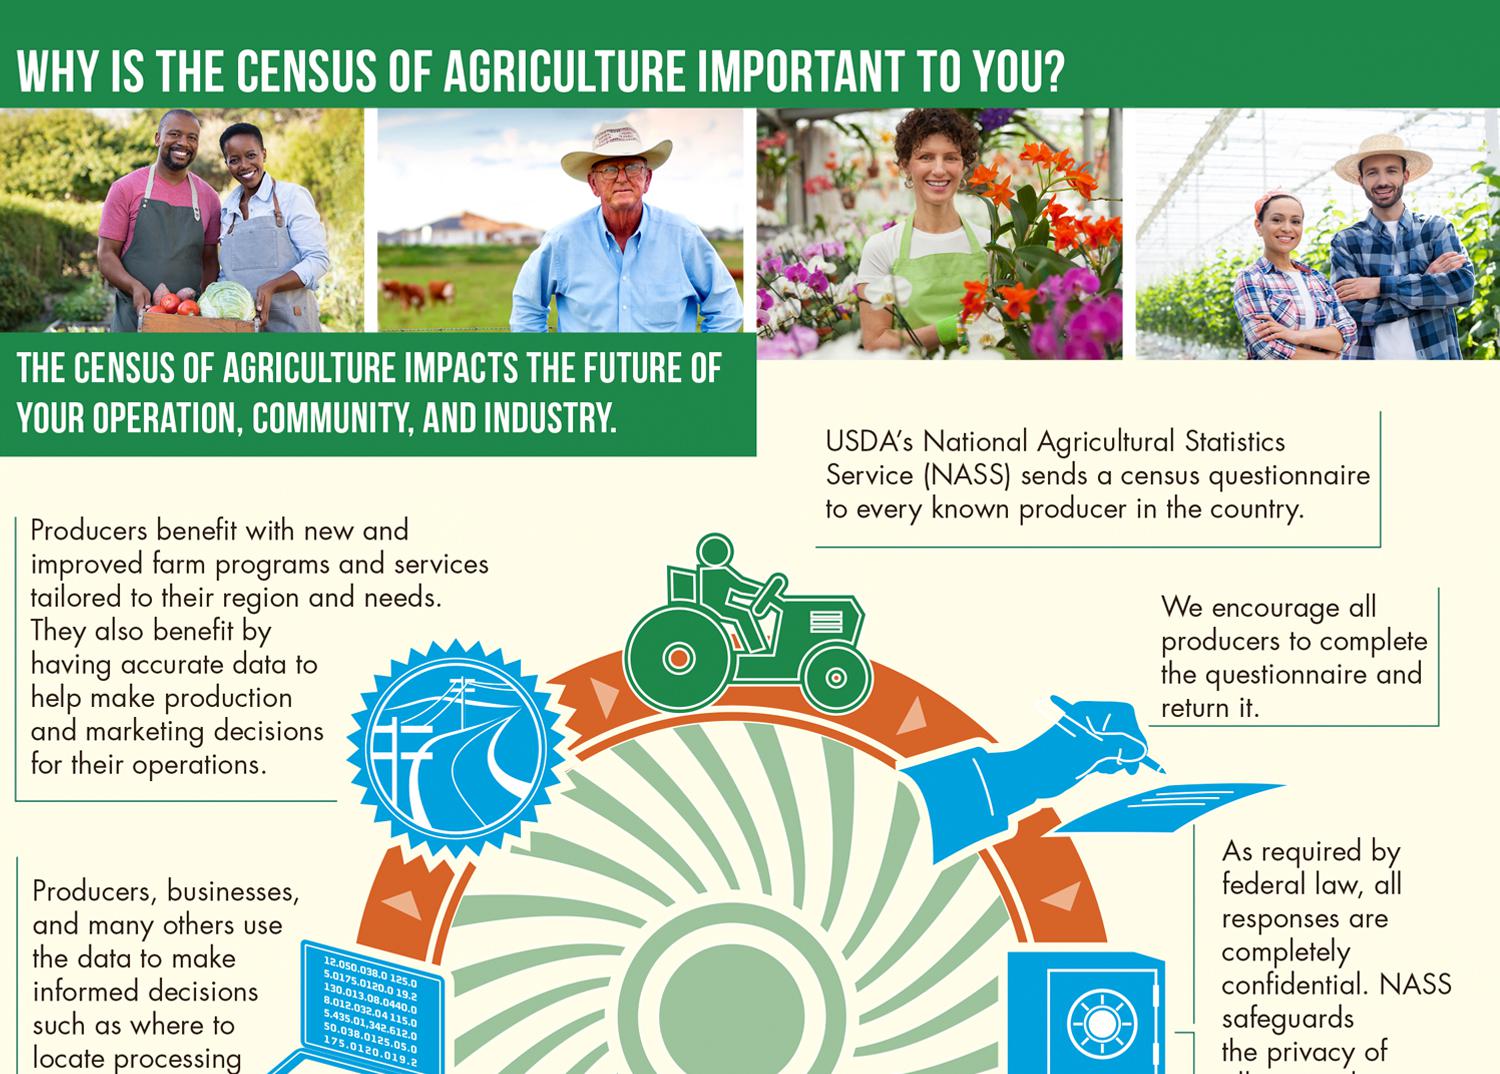 Graphic titled, Why is the census of agriculture important to you?